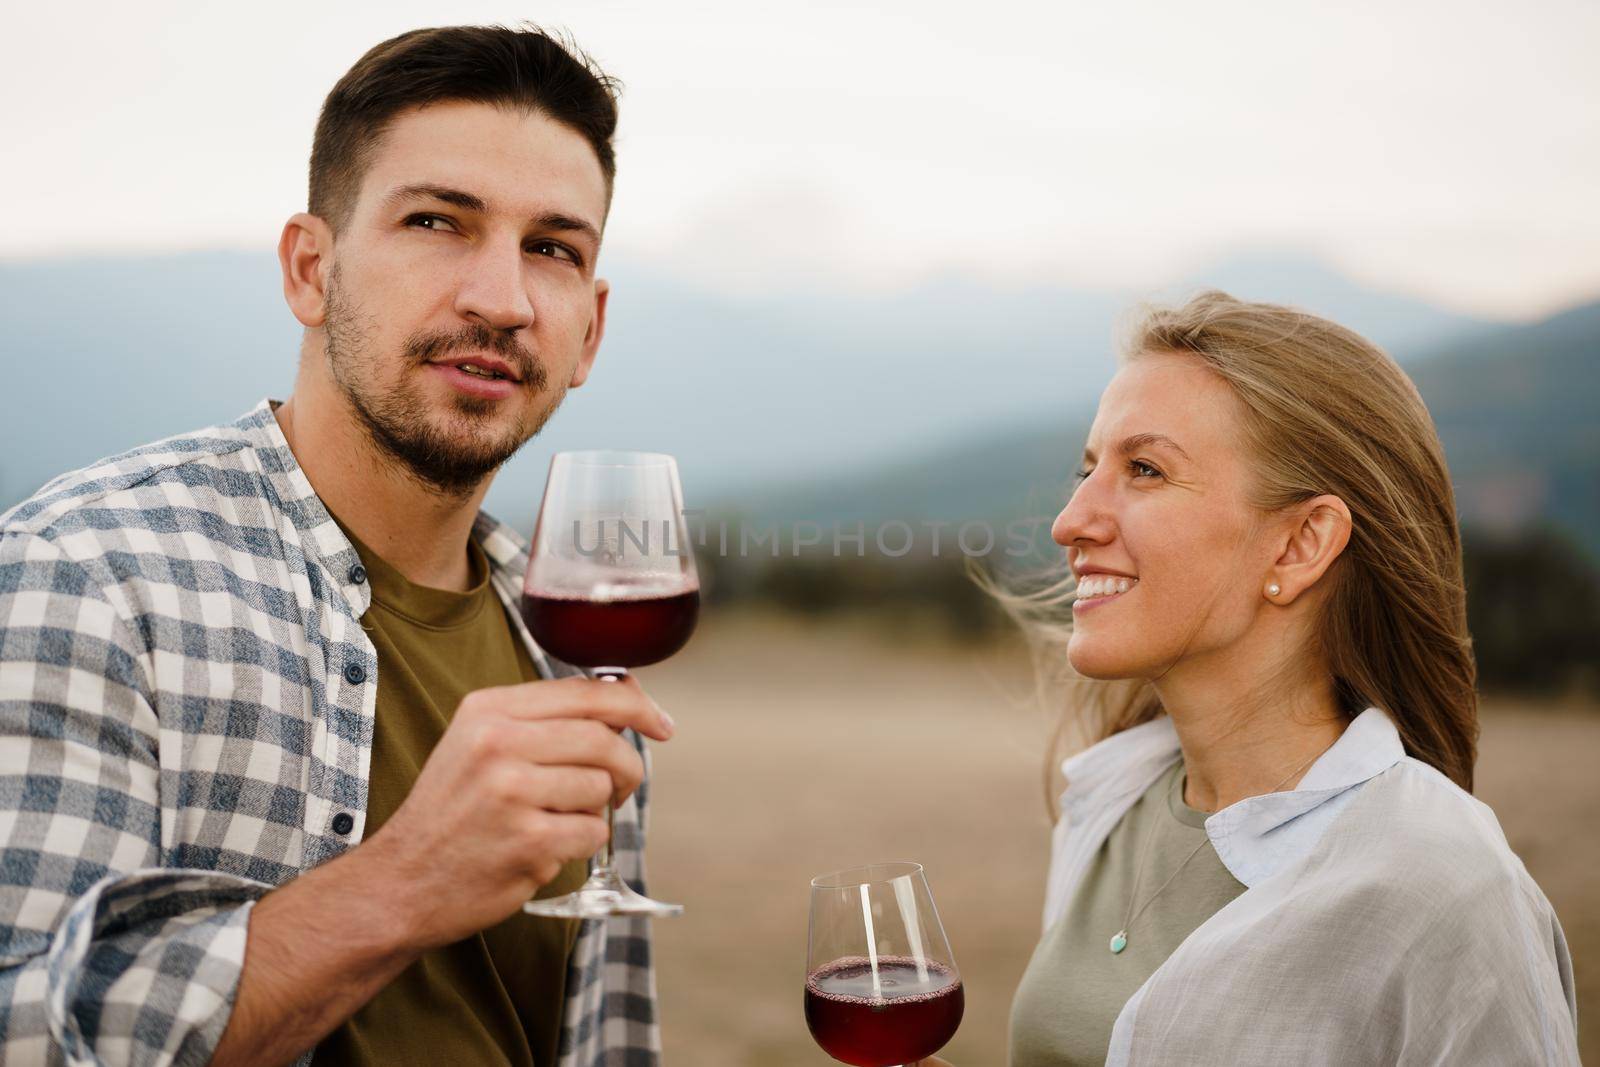 Smiling couple toasting wine glasses outdoors in mountains, close up portrait